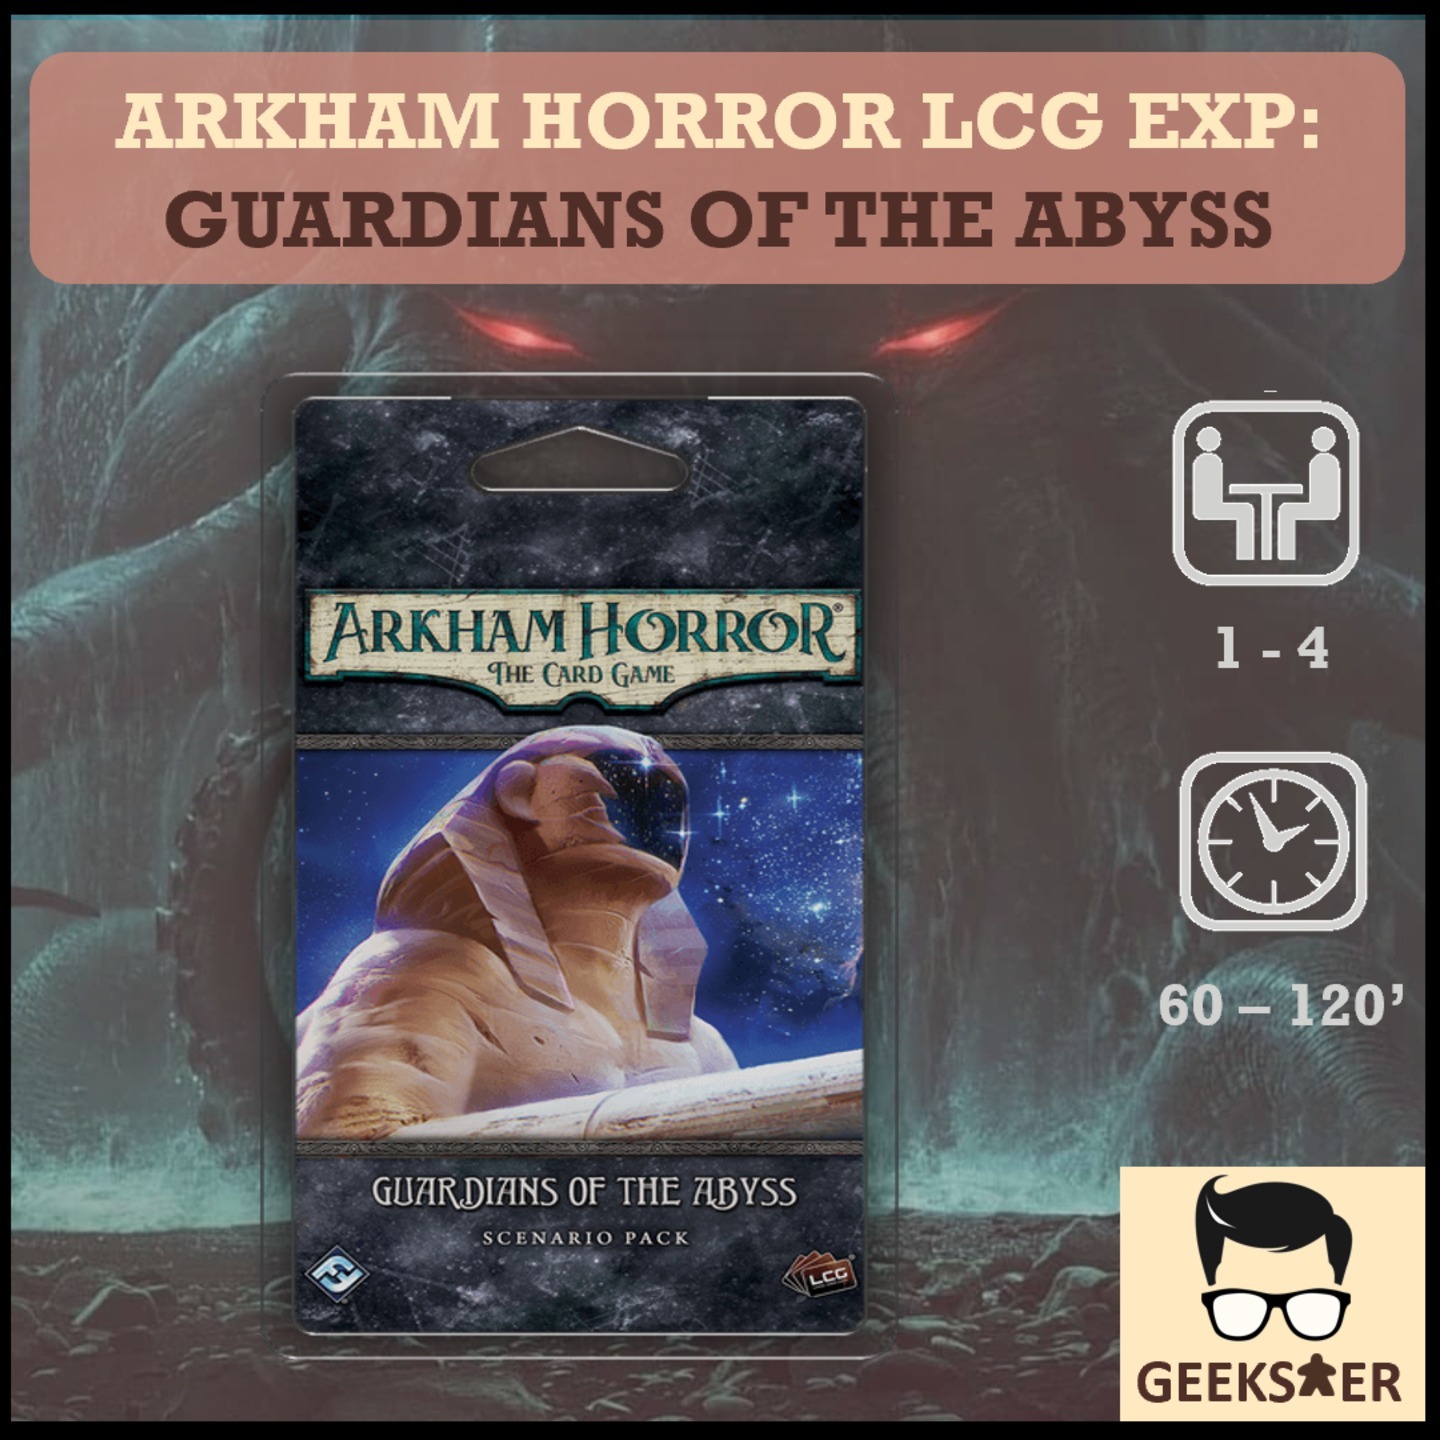 Arkham Horror LCG Exp -  Guardians of the Abyss